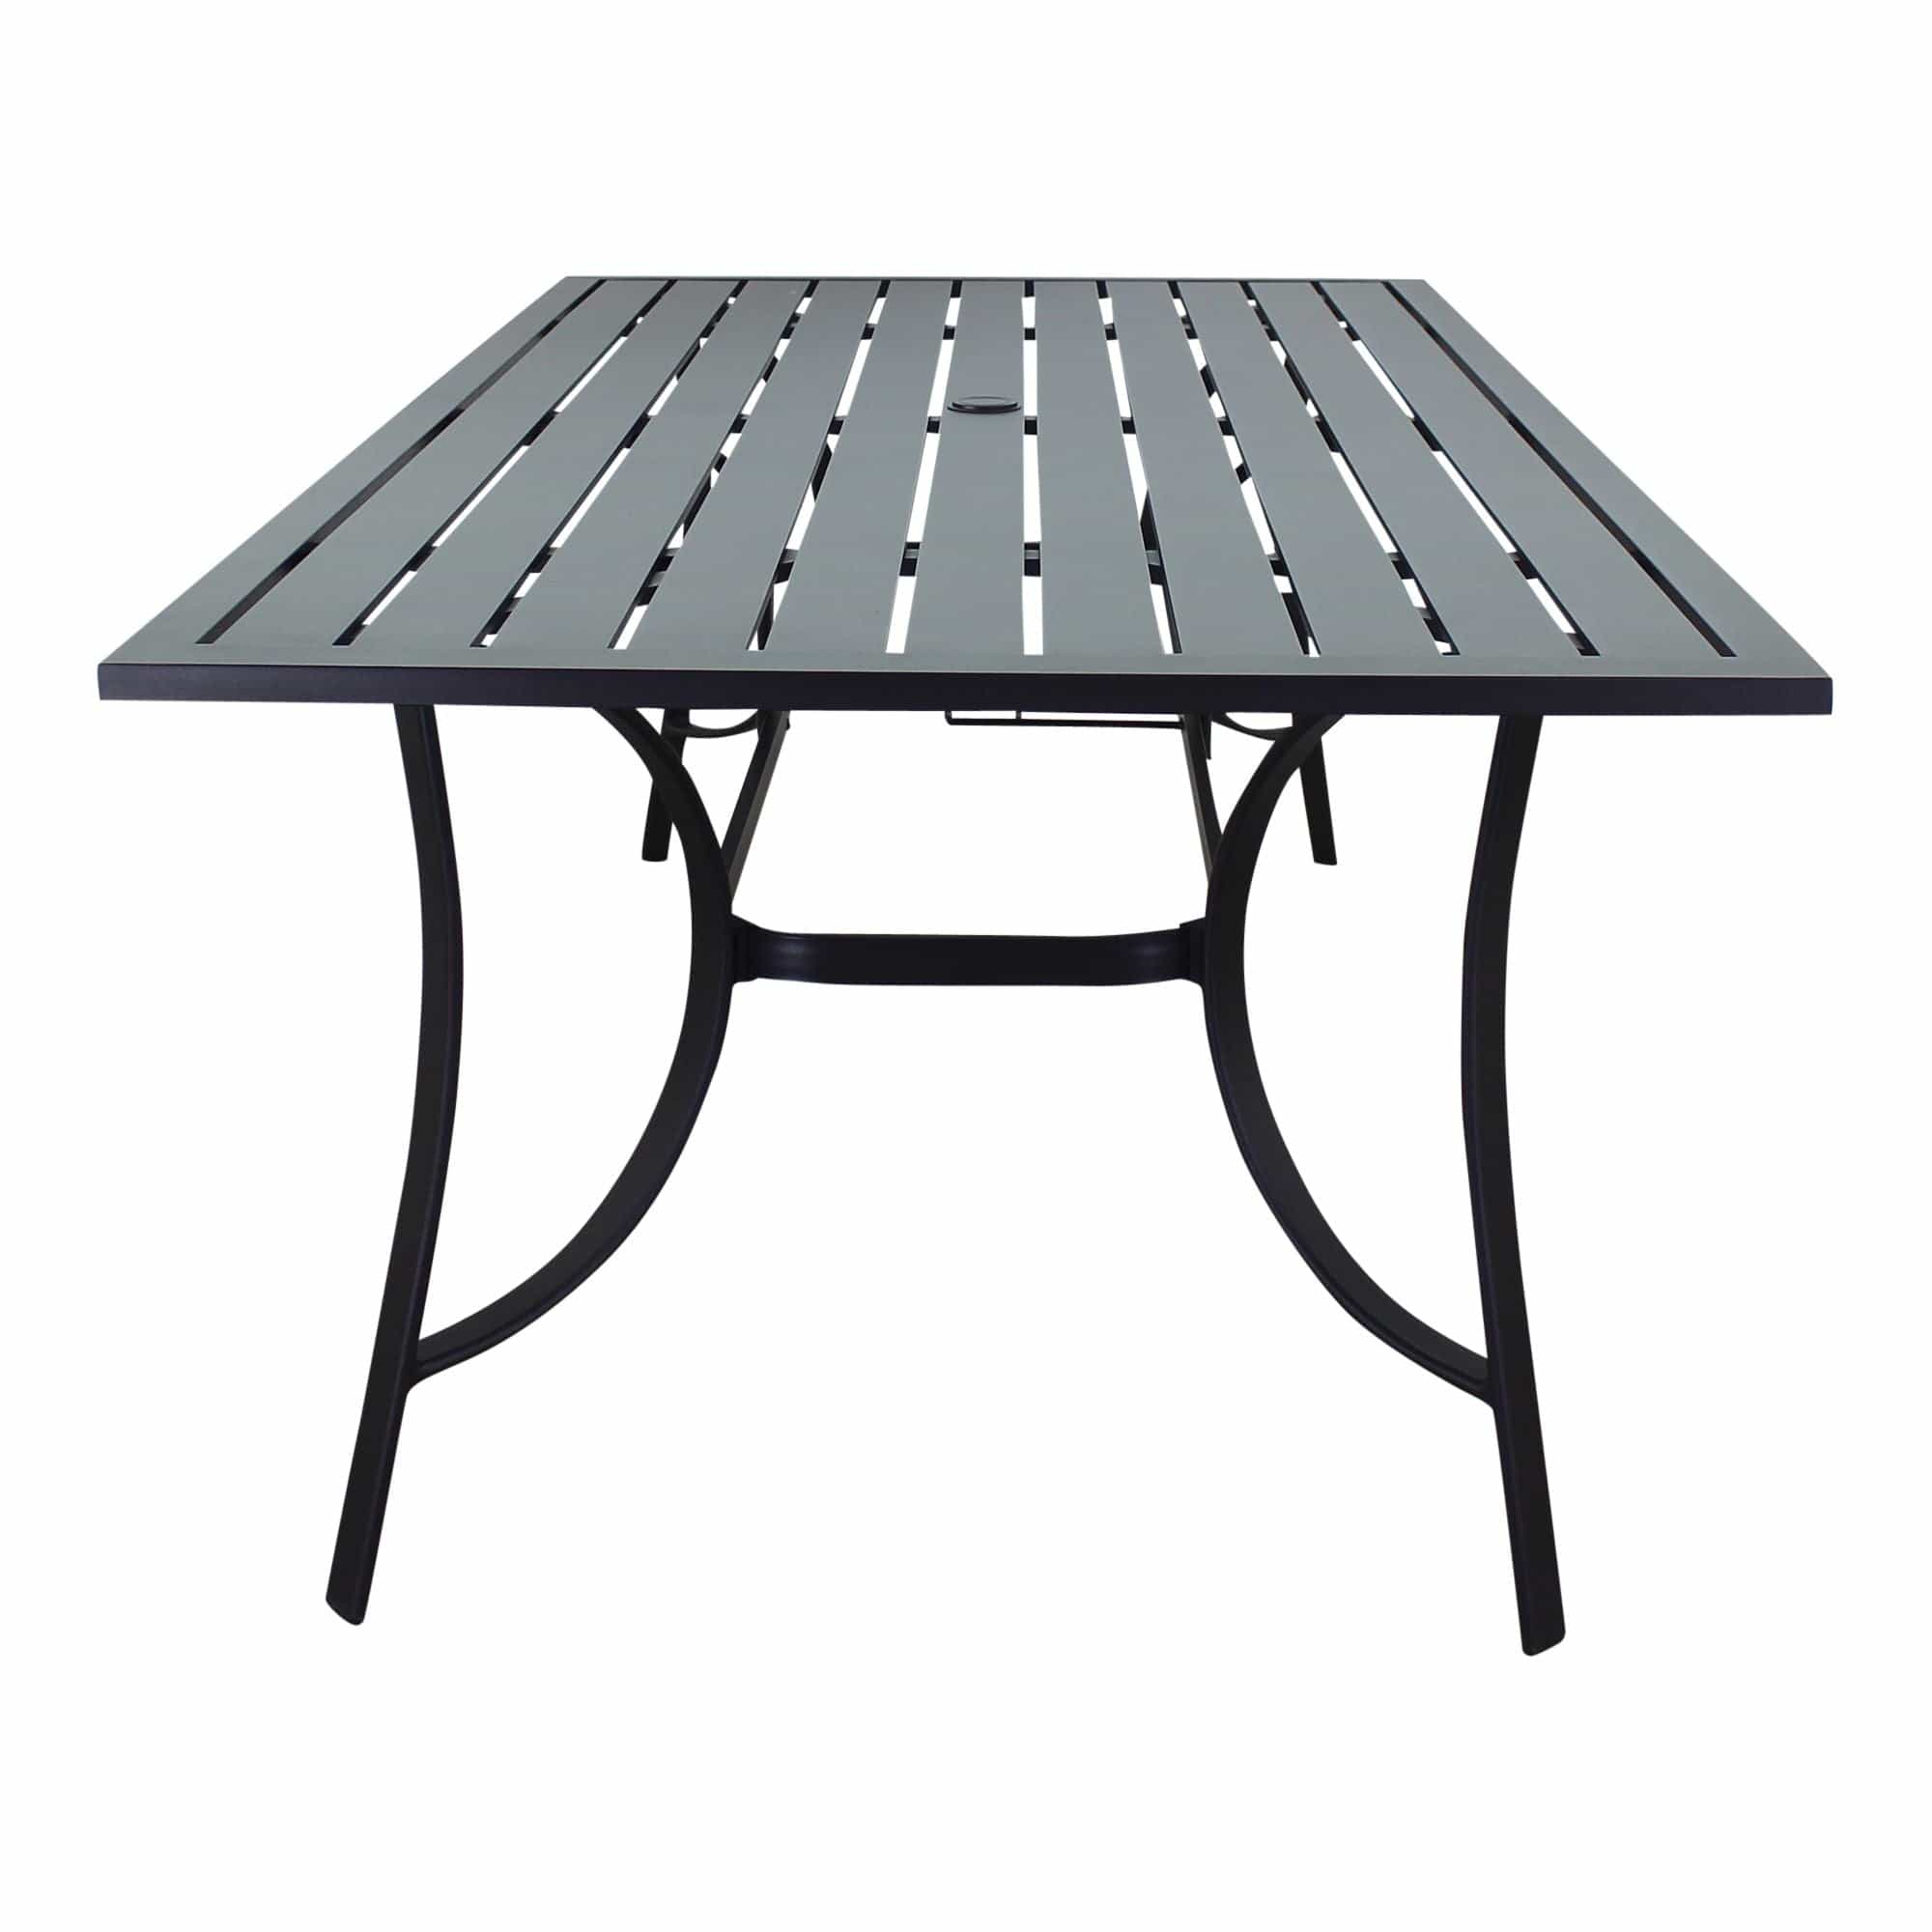 Courtyard Casual Outdoor Dining Table Courtyard Casual -  Santa Fe 84" x 42" Rectangle Aluminum Dining Table with Slat Top and Umbrella Hole in Java | 5676